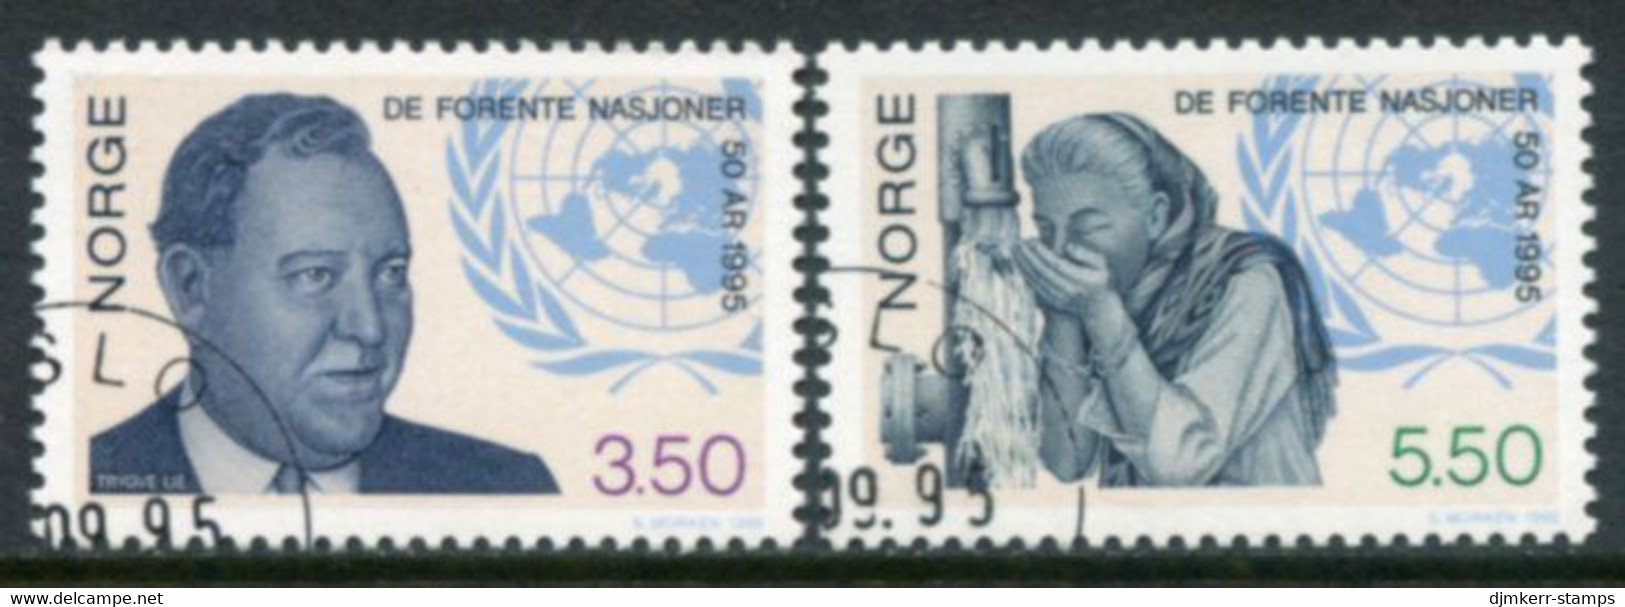 NORWAY 1995 50th Anniversary Of UNO Used.   Michel 1187-88 - Oblitérés